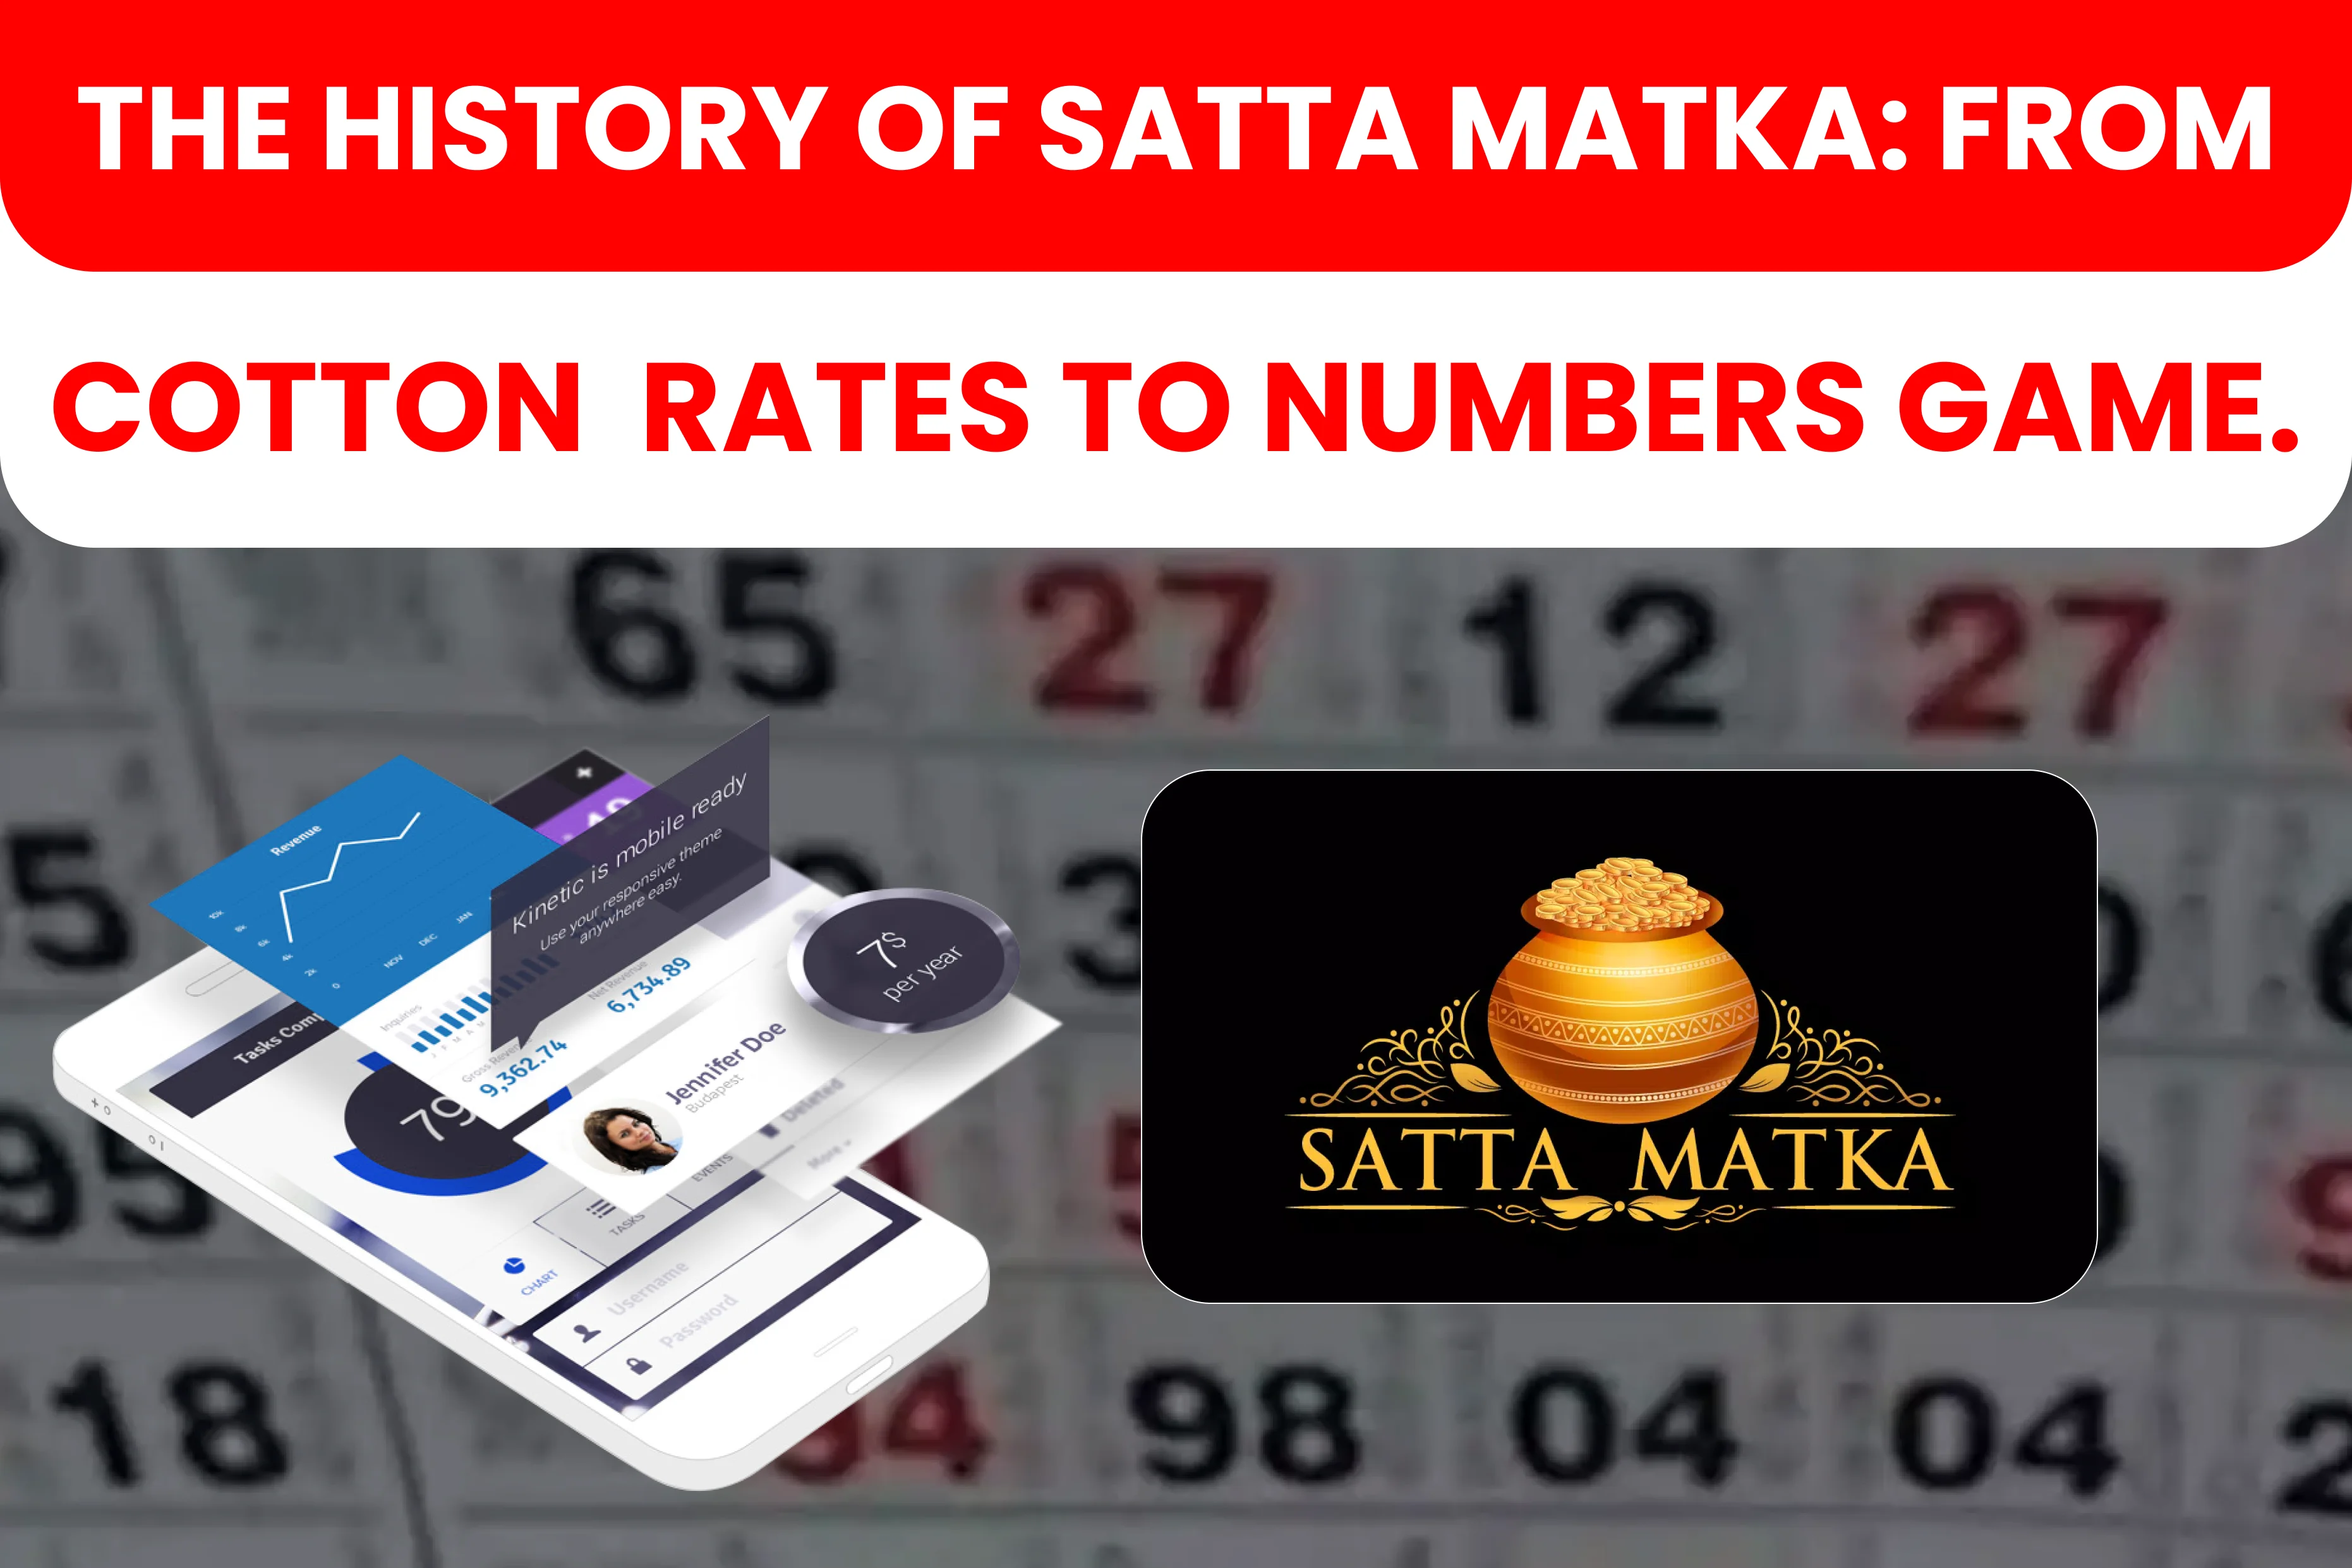 The History of Satta Matka: From Cotton Rates to Numbers Game